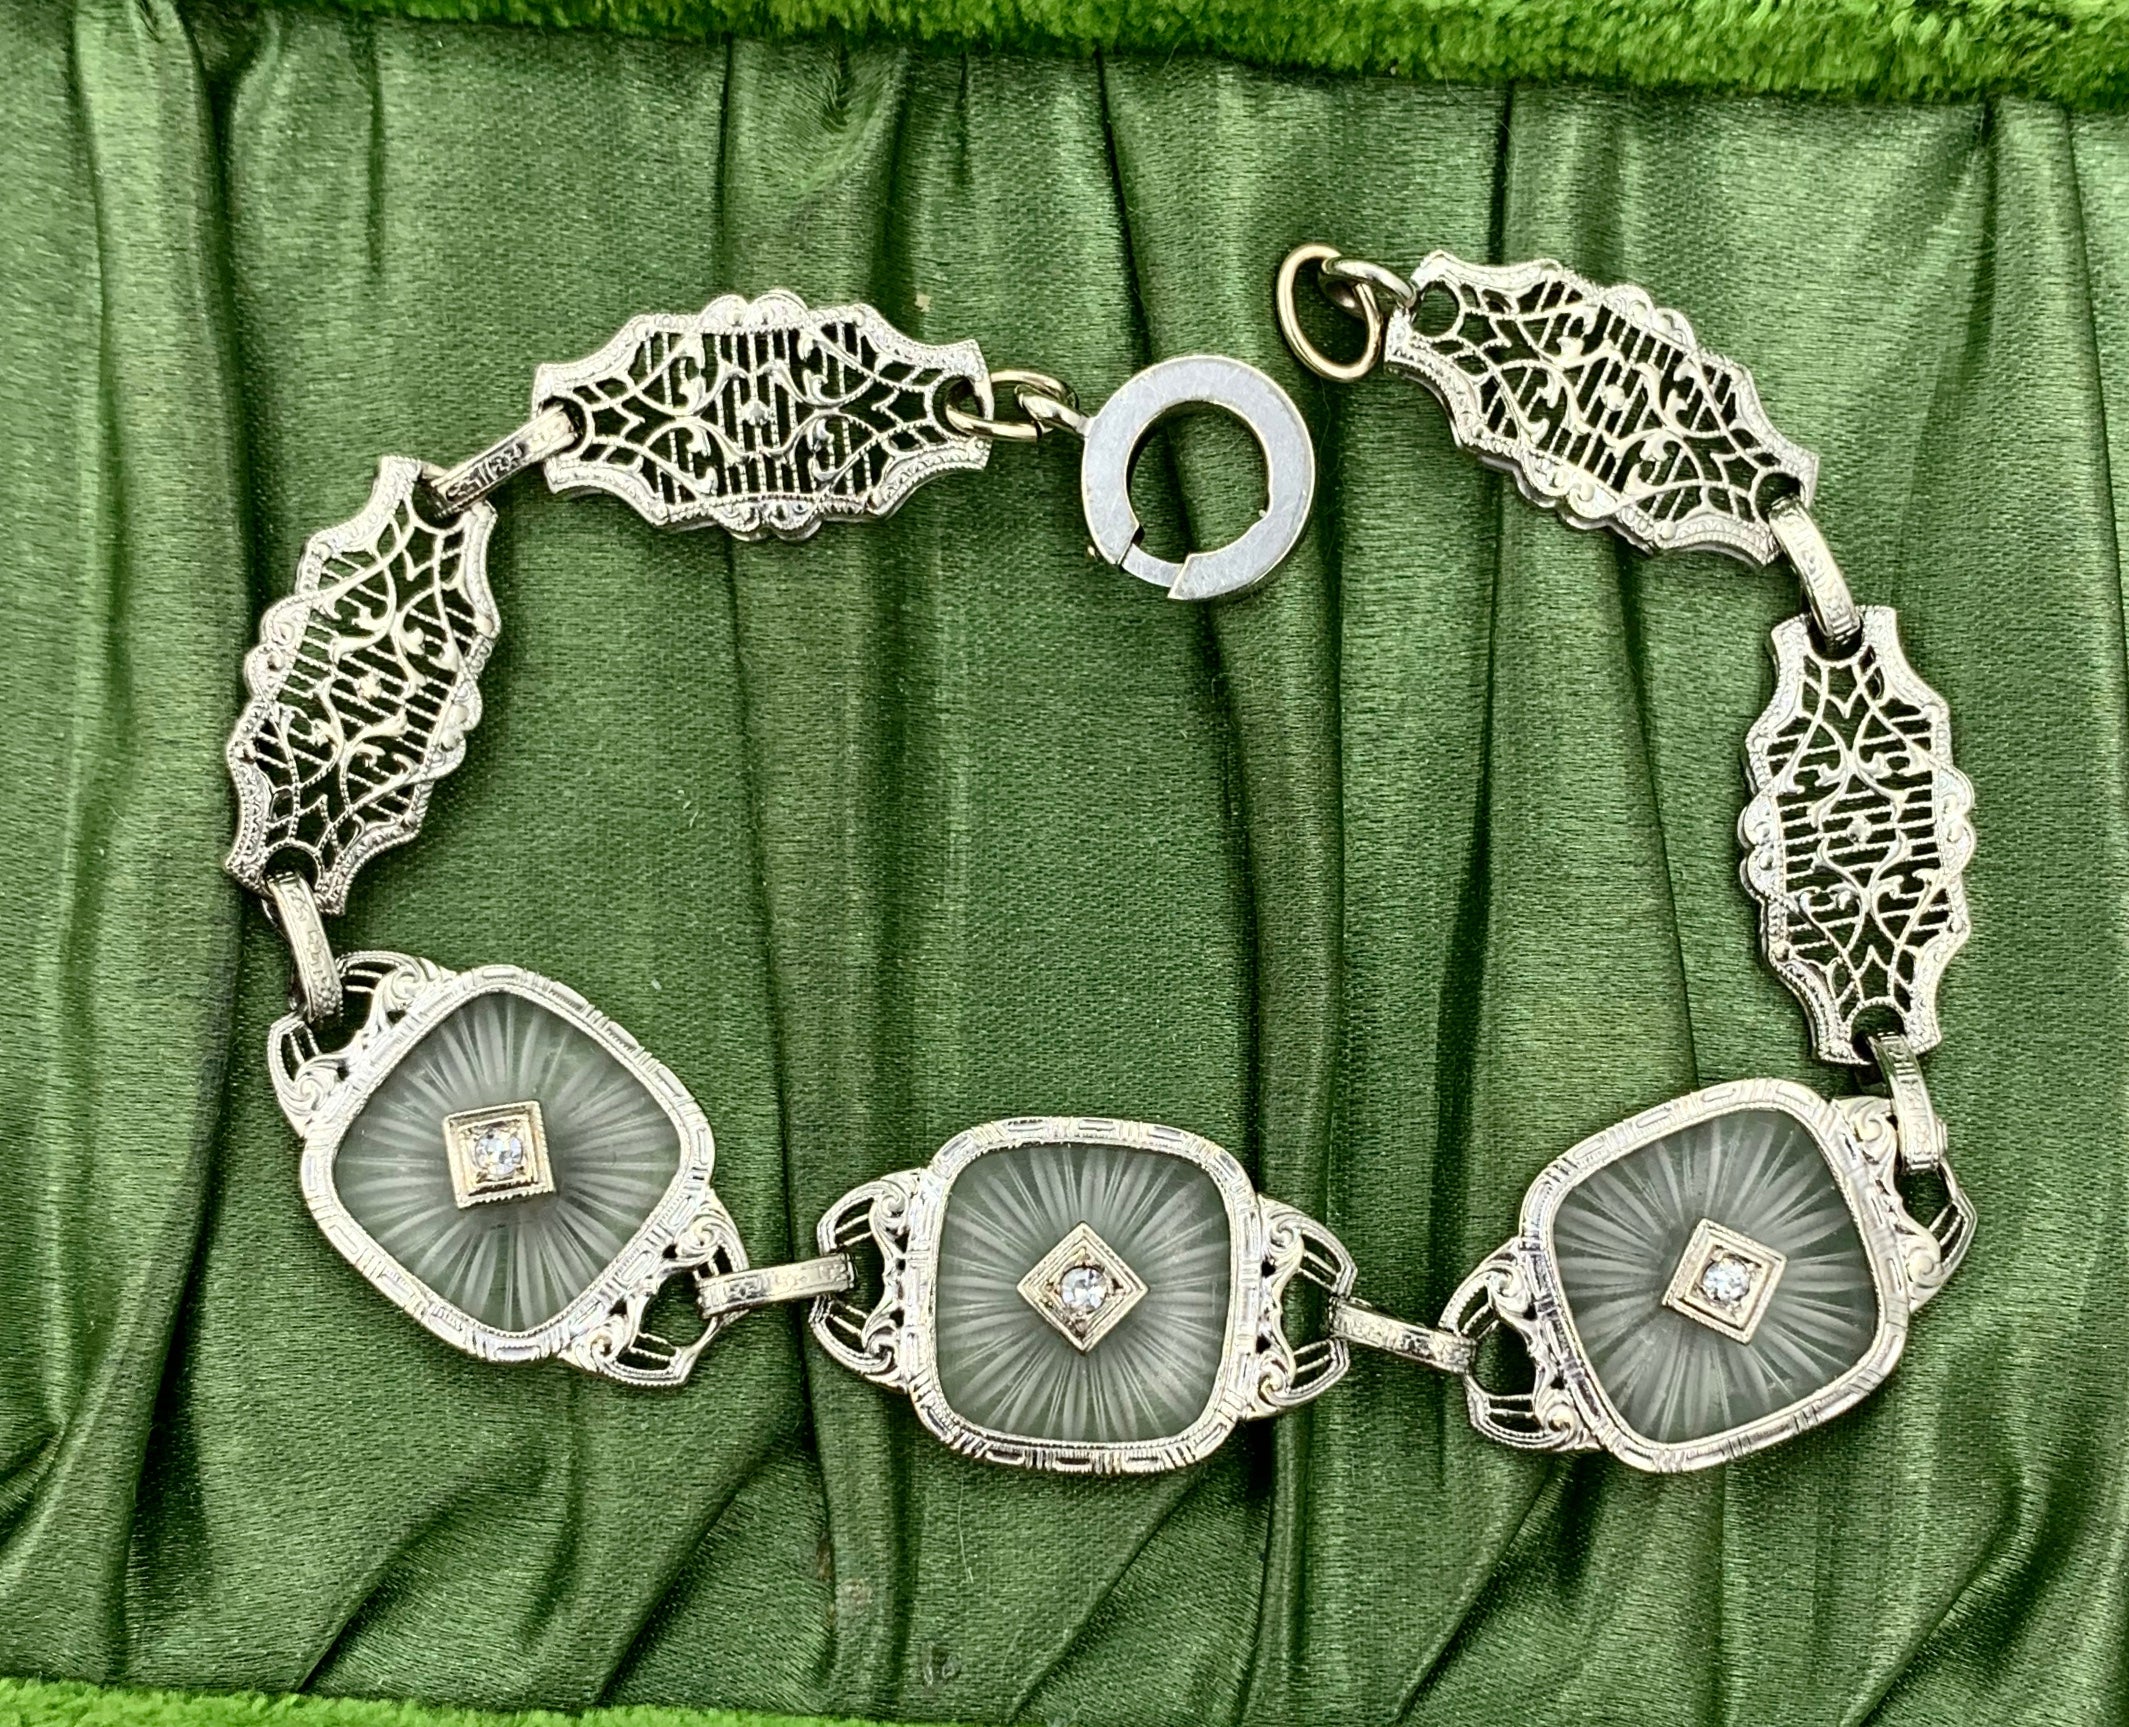 This is a radiant Diamond Frosted Rock Quartz Crystal 14 Karat White Gold Bracelet.  The classic antique Art Deco bracelet of great beauty is set with three square carved Rock Crystal plaques (also known as camphor glass) with a sunburst motif